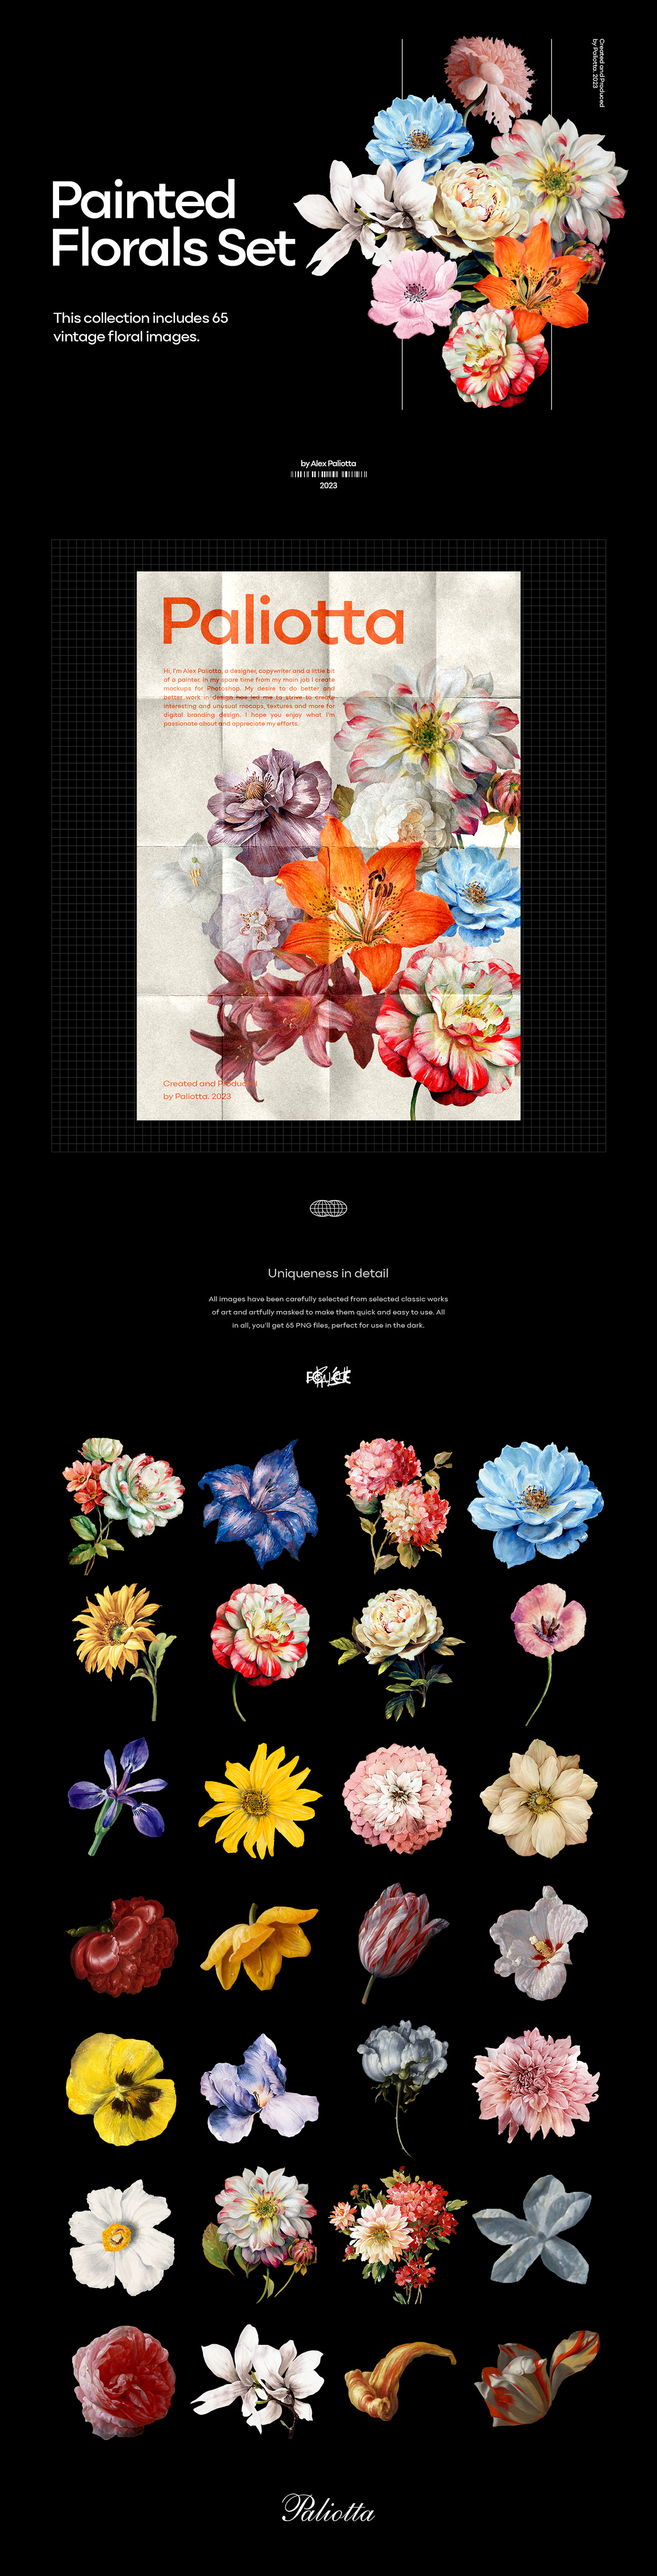 floral illustration 72 dpi freebie beautiful collection commercial use lovely floral painted floral png download vintage floral